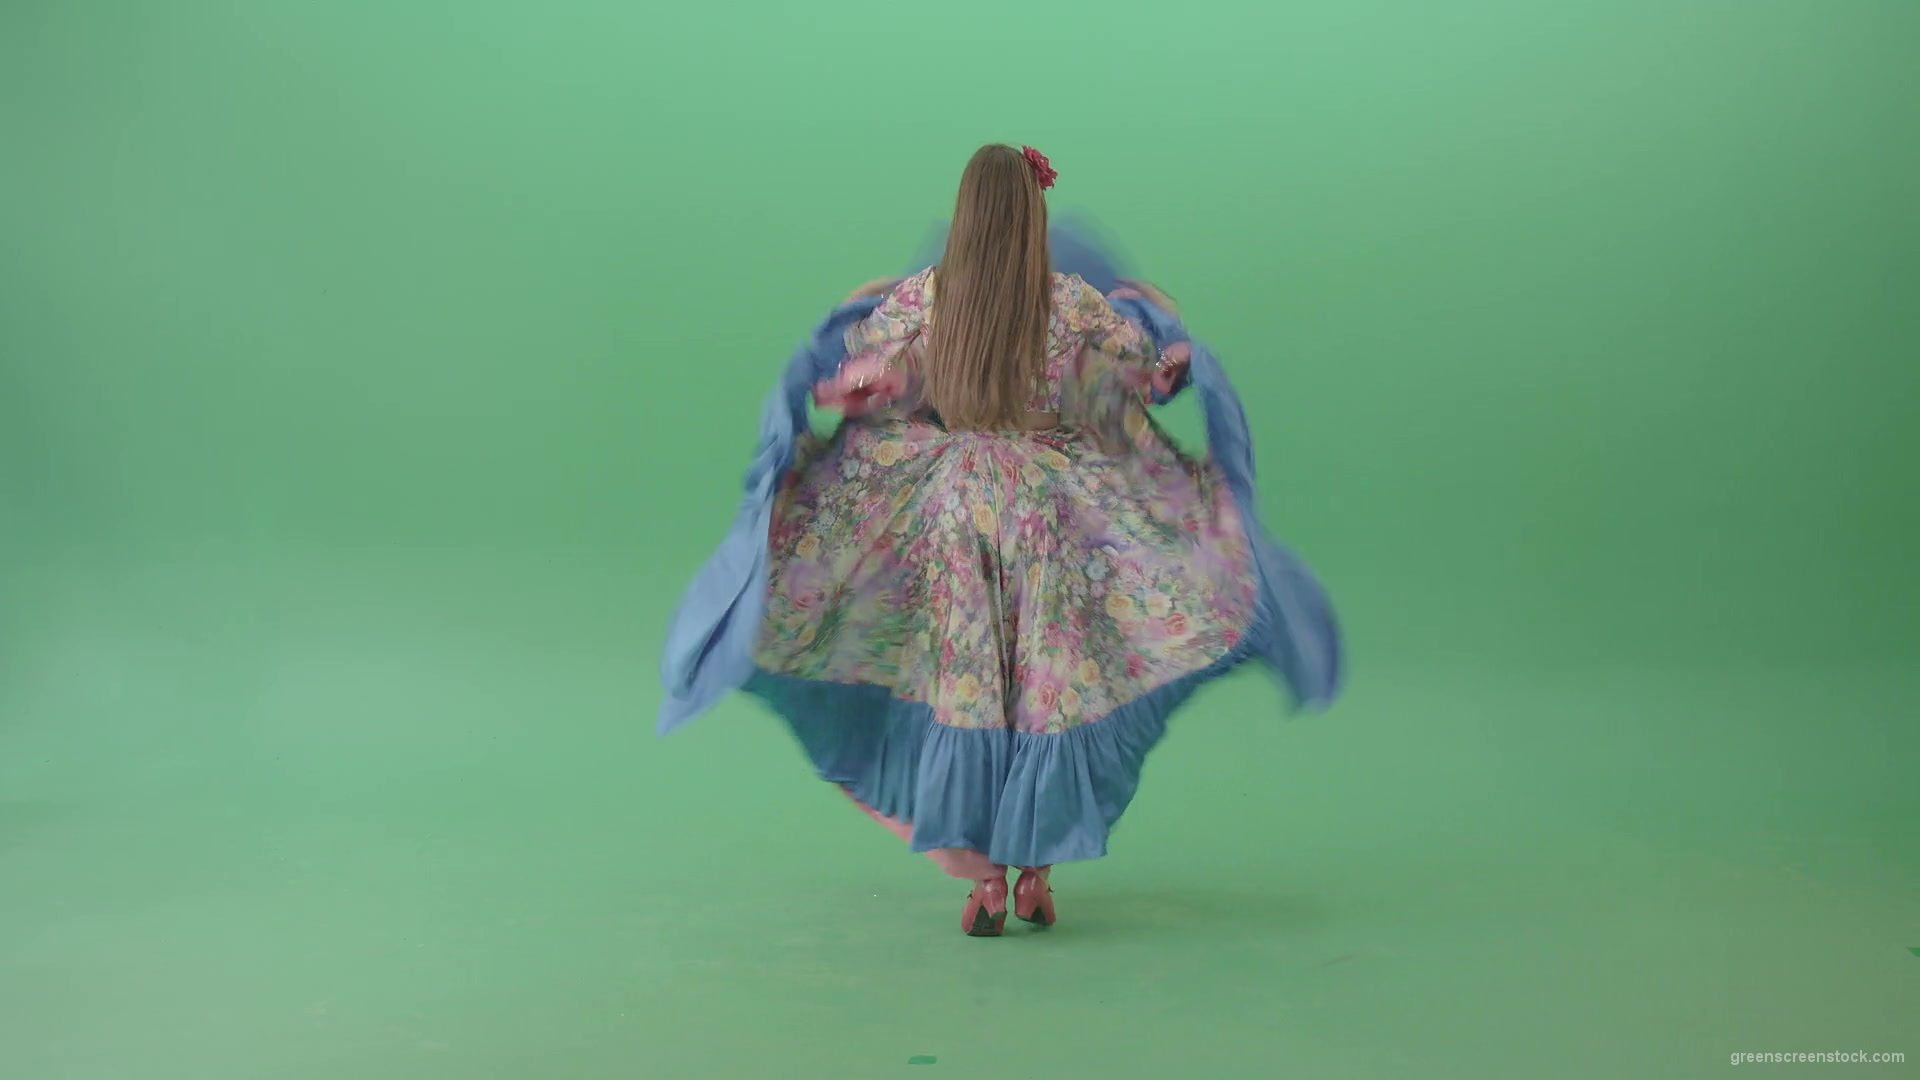 Dancing-gipsy-girl-waving-balkan-dress-from-back-view-isolated-on-green-screen-4K-Video-Stock-Footage-1920_009 Green Screen Stock